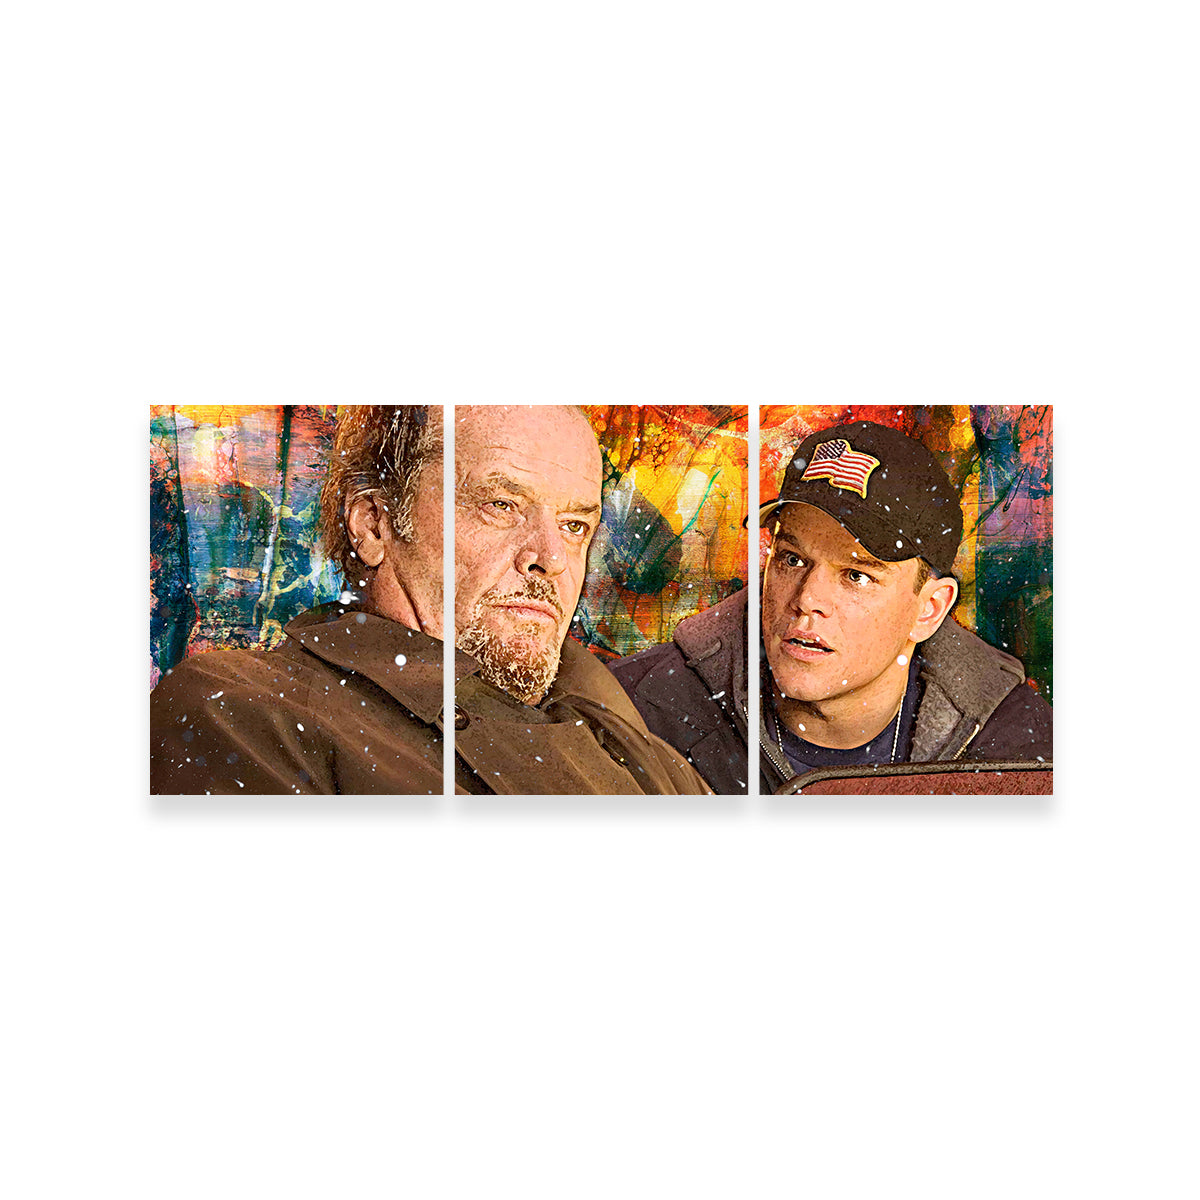 The Departed - Costello & Colin